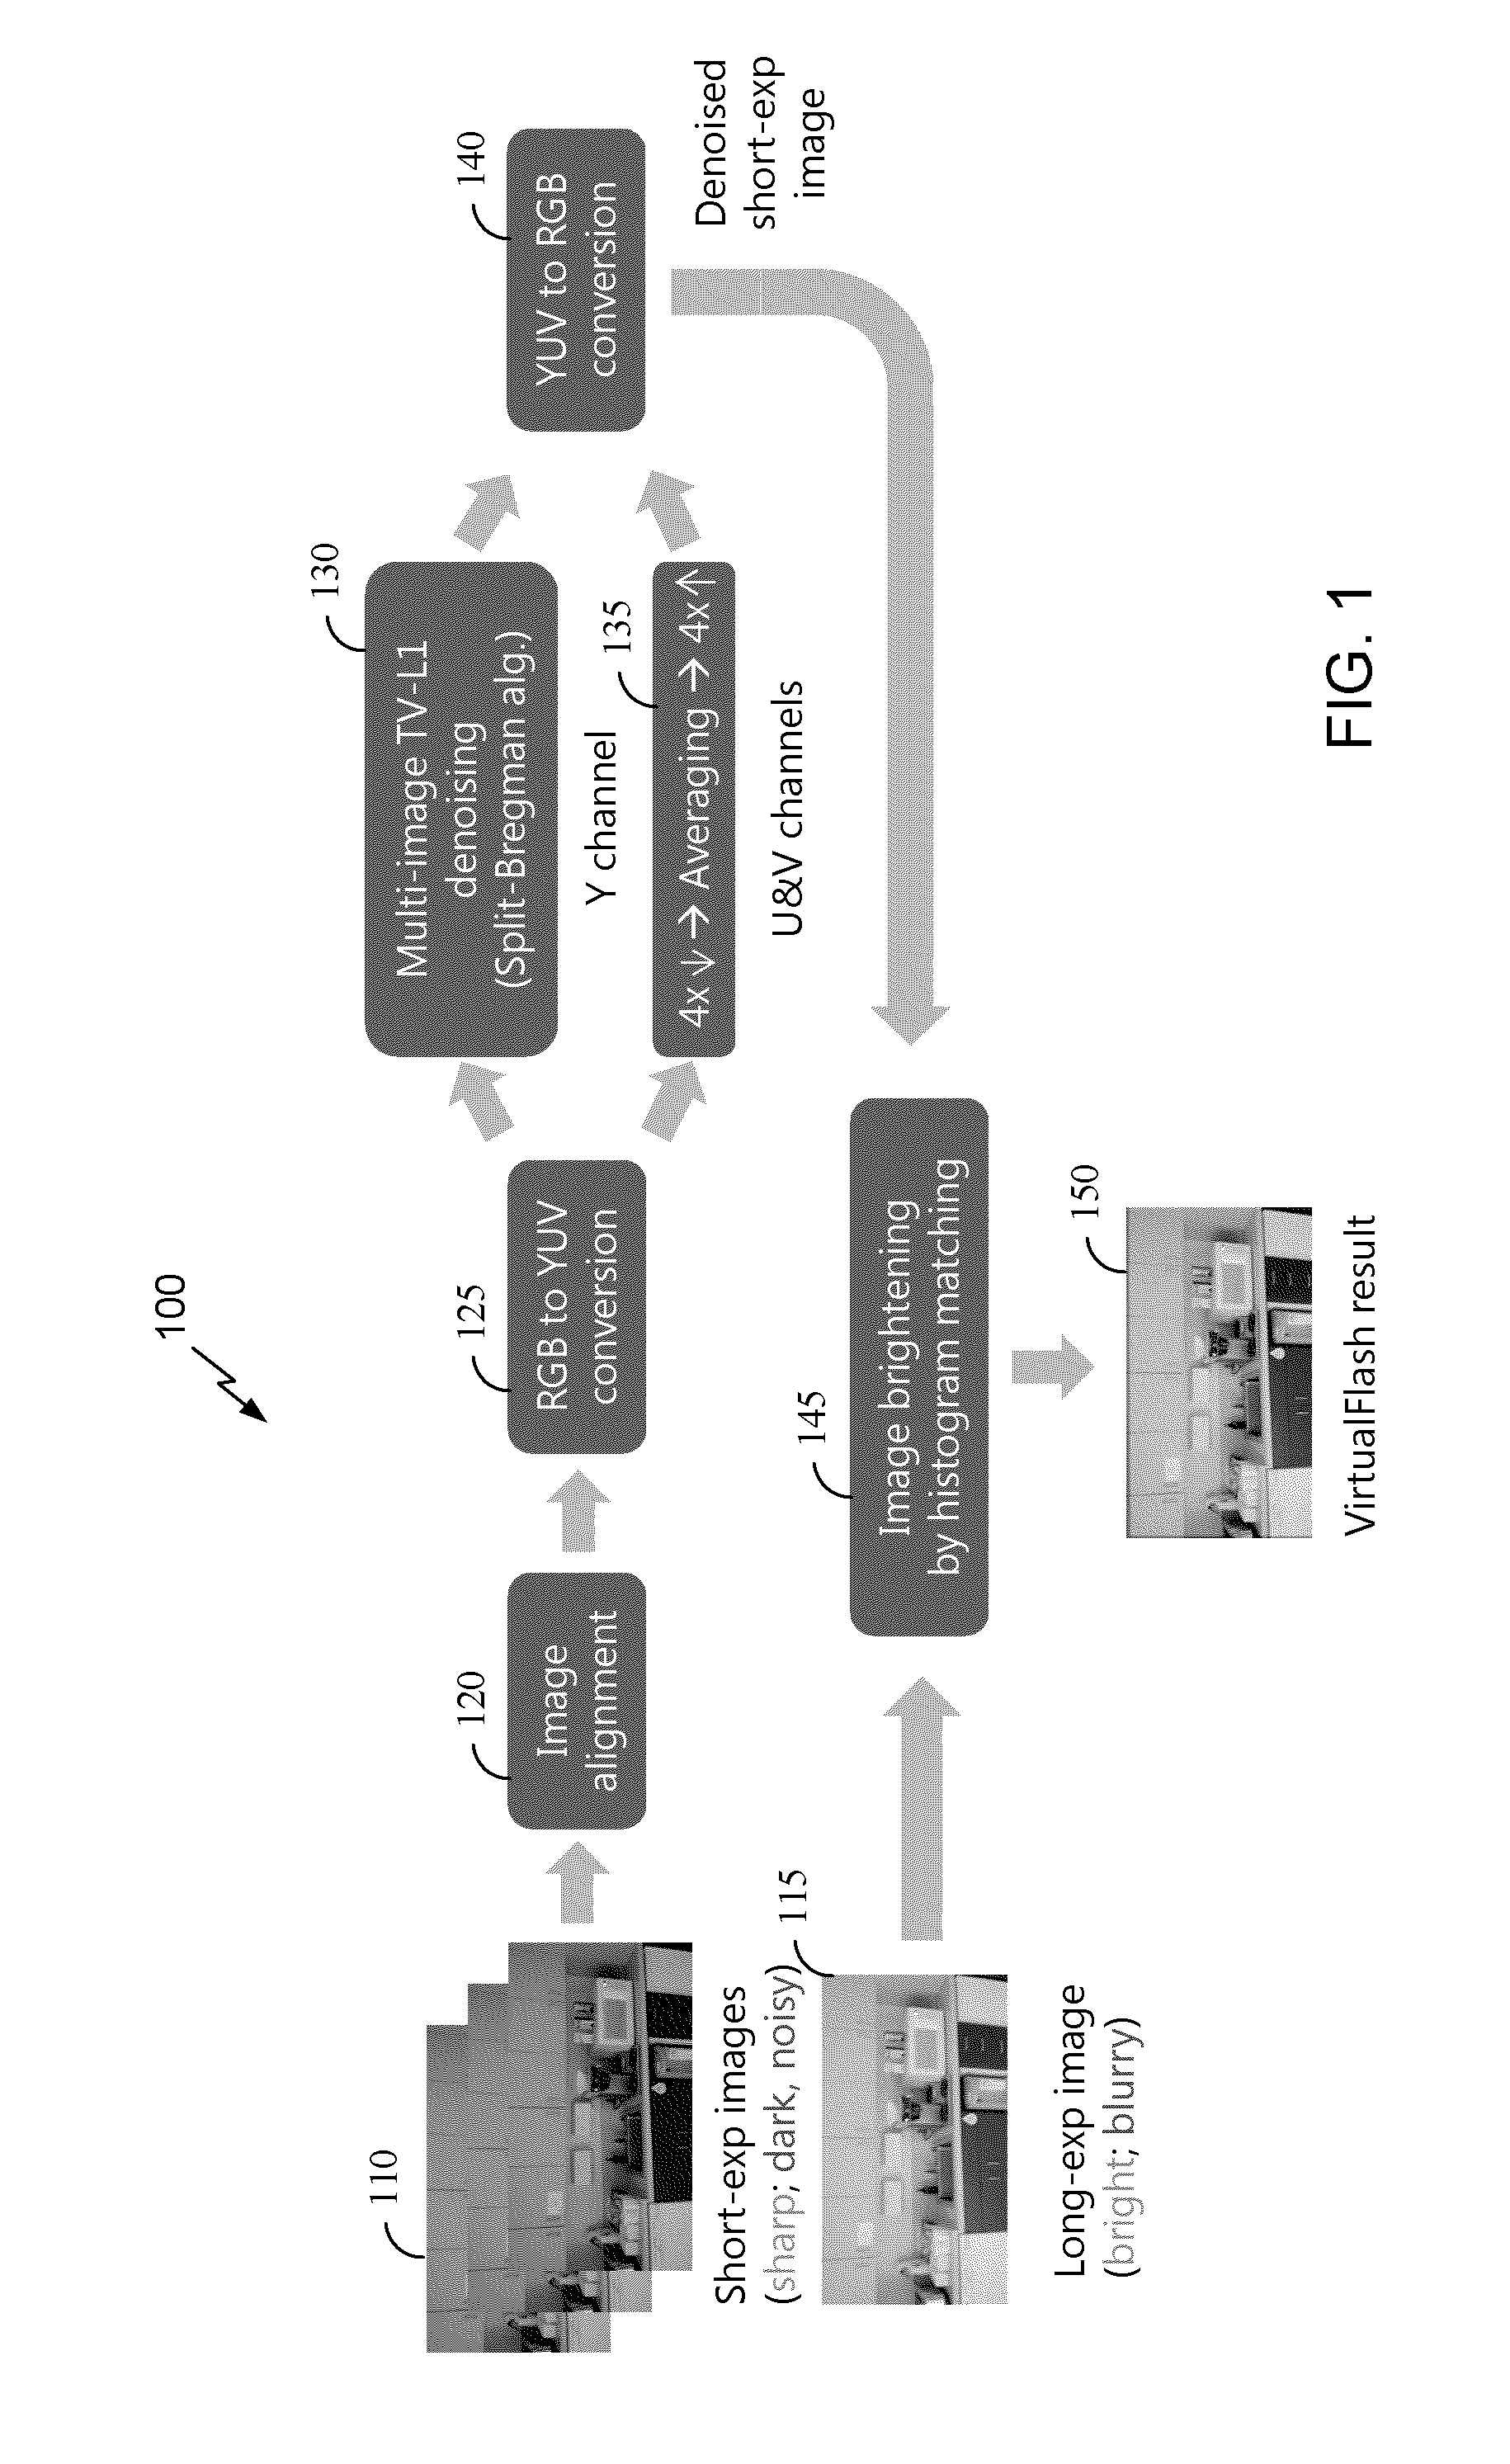 System and method to capture images with reduced blurriness in low light conditions